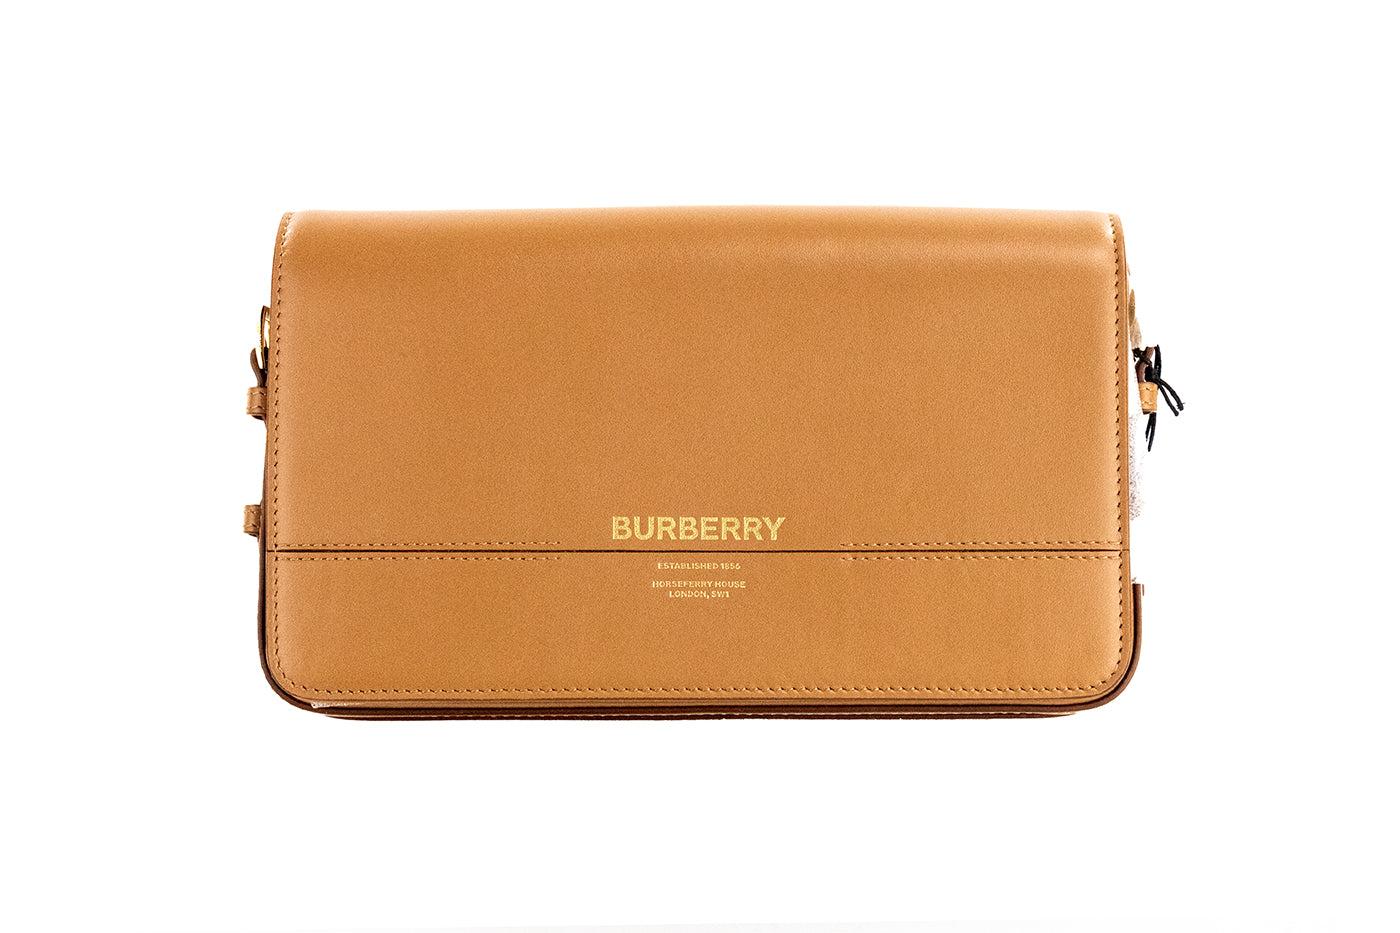 Burberry Macken Small Pale Orchid House Check Derby Leather Crossbody Bag  Purse in Black